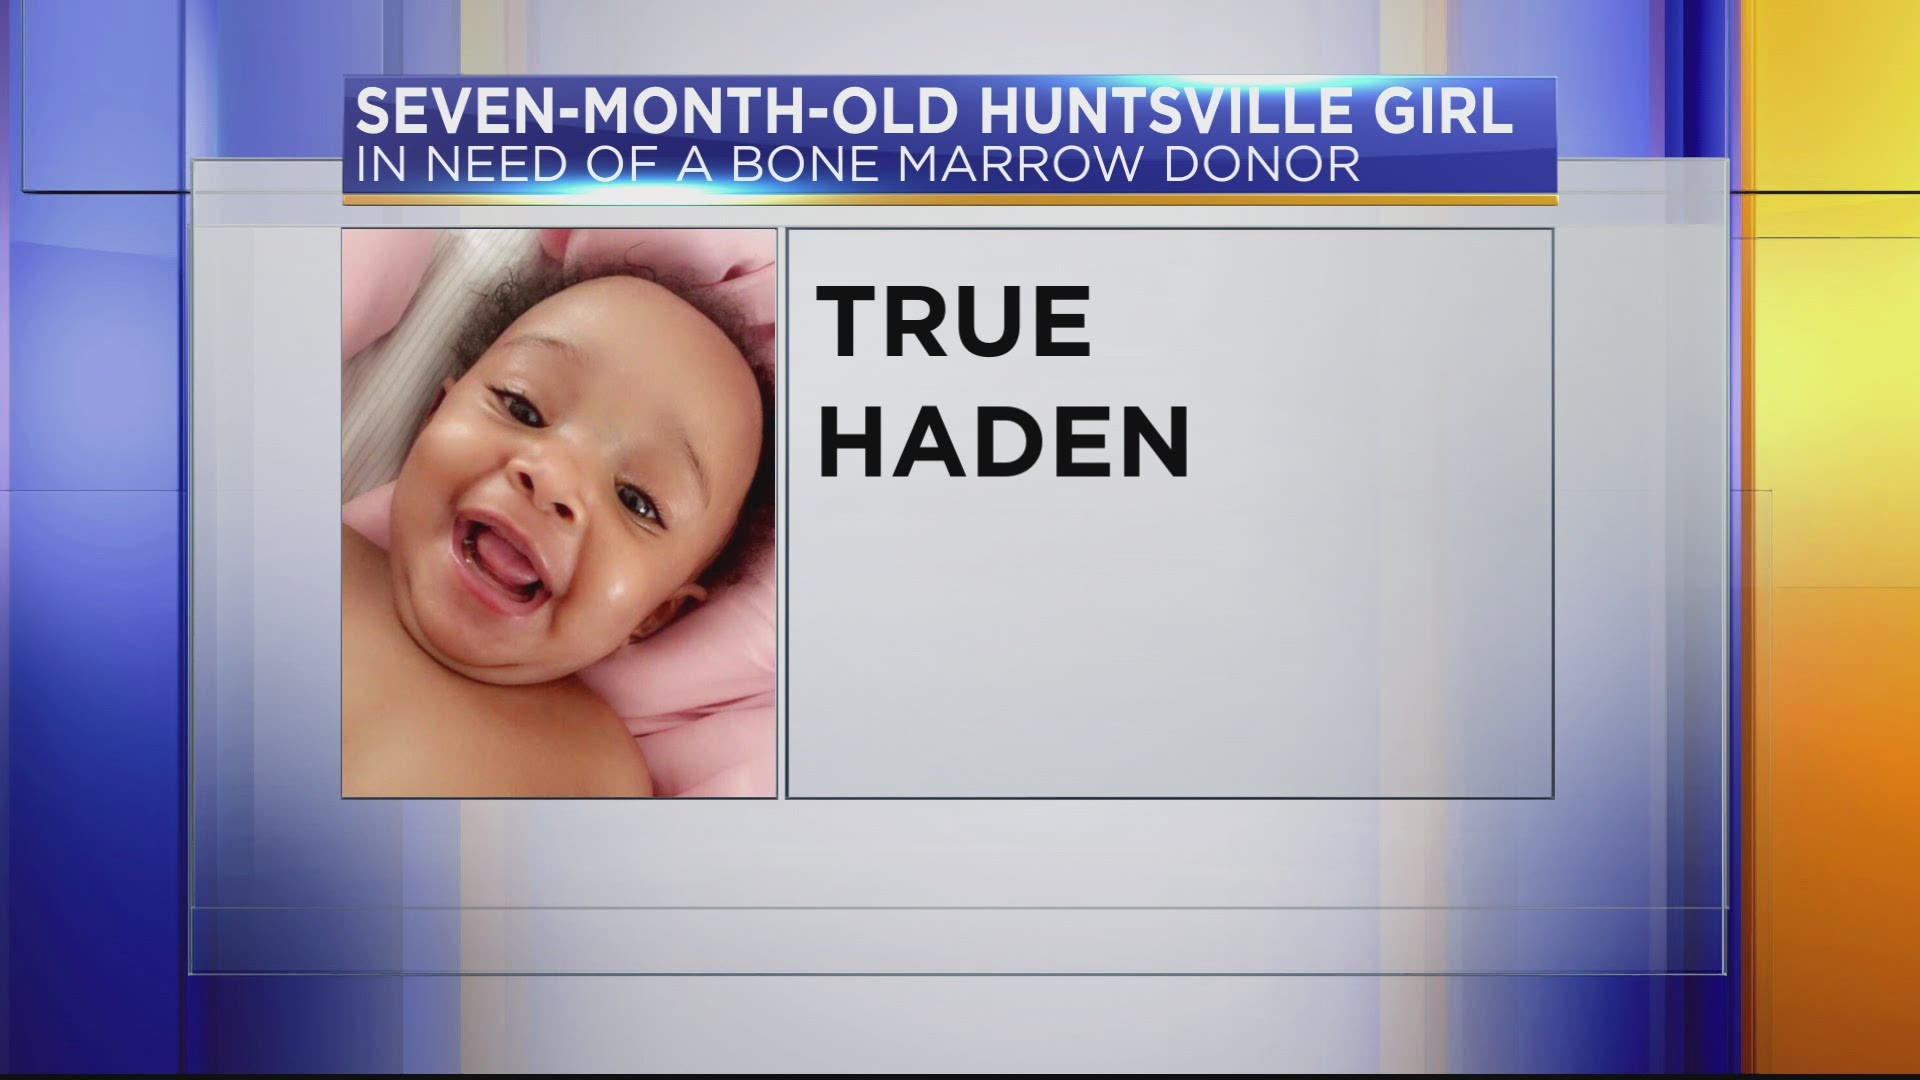 True Haden was diagnosed with congenital amegakaryocytic thrombocytopneia (CAMT), causing her to need a bone marrow transplant in order to survive.